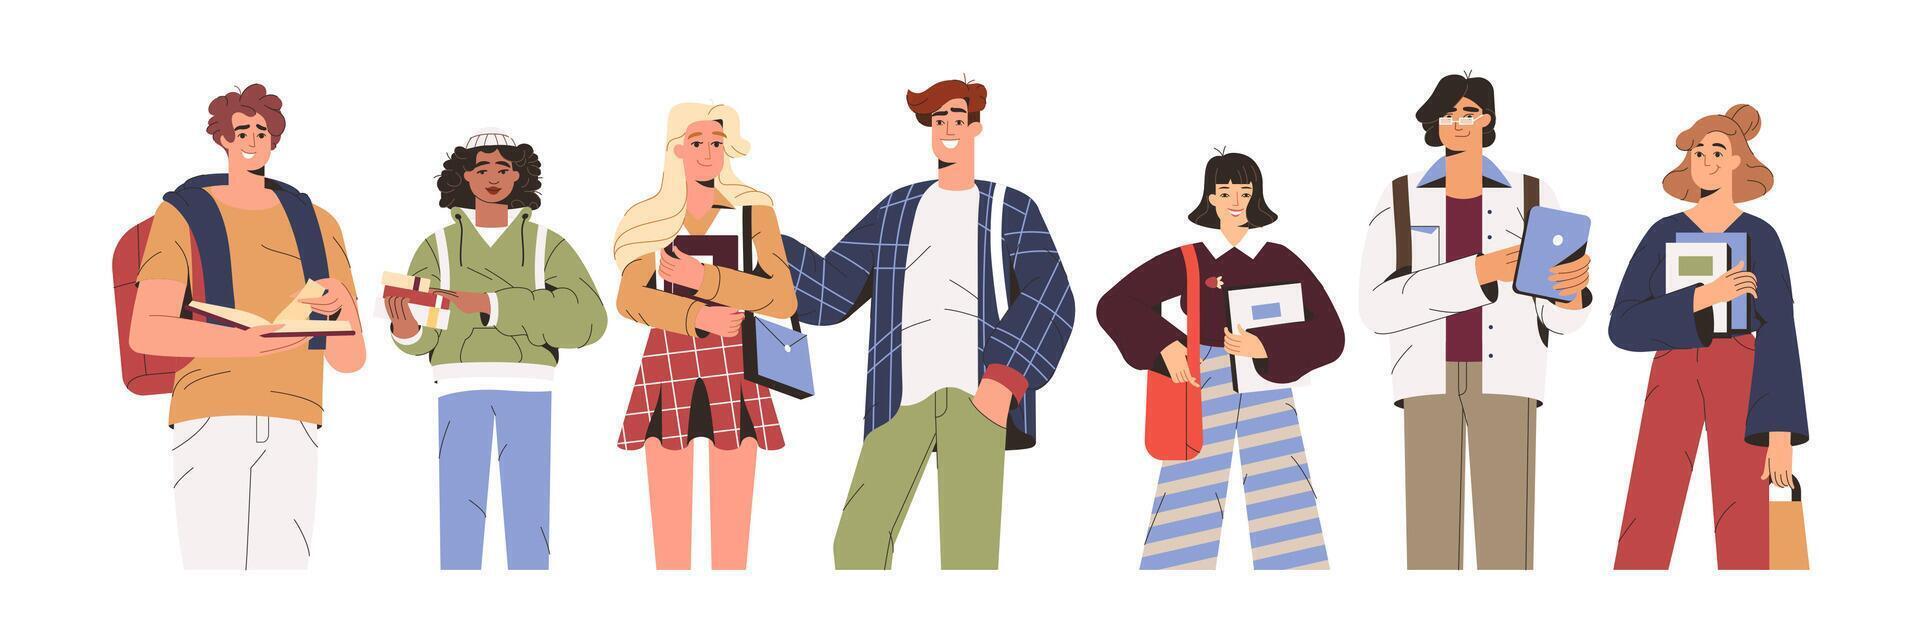 Group of happy students, young people hold gadgets and study books. School or university friends of different nationalities together. Flat smiling multicultural teens in casual clothes with bags. vector